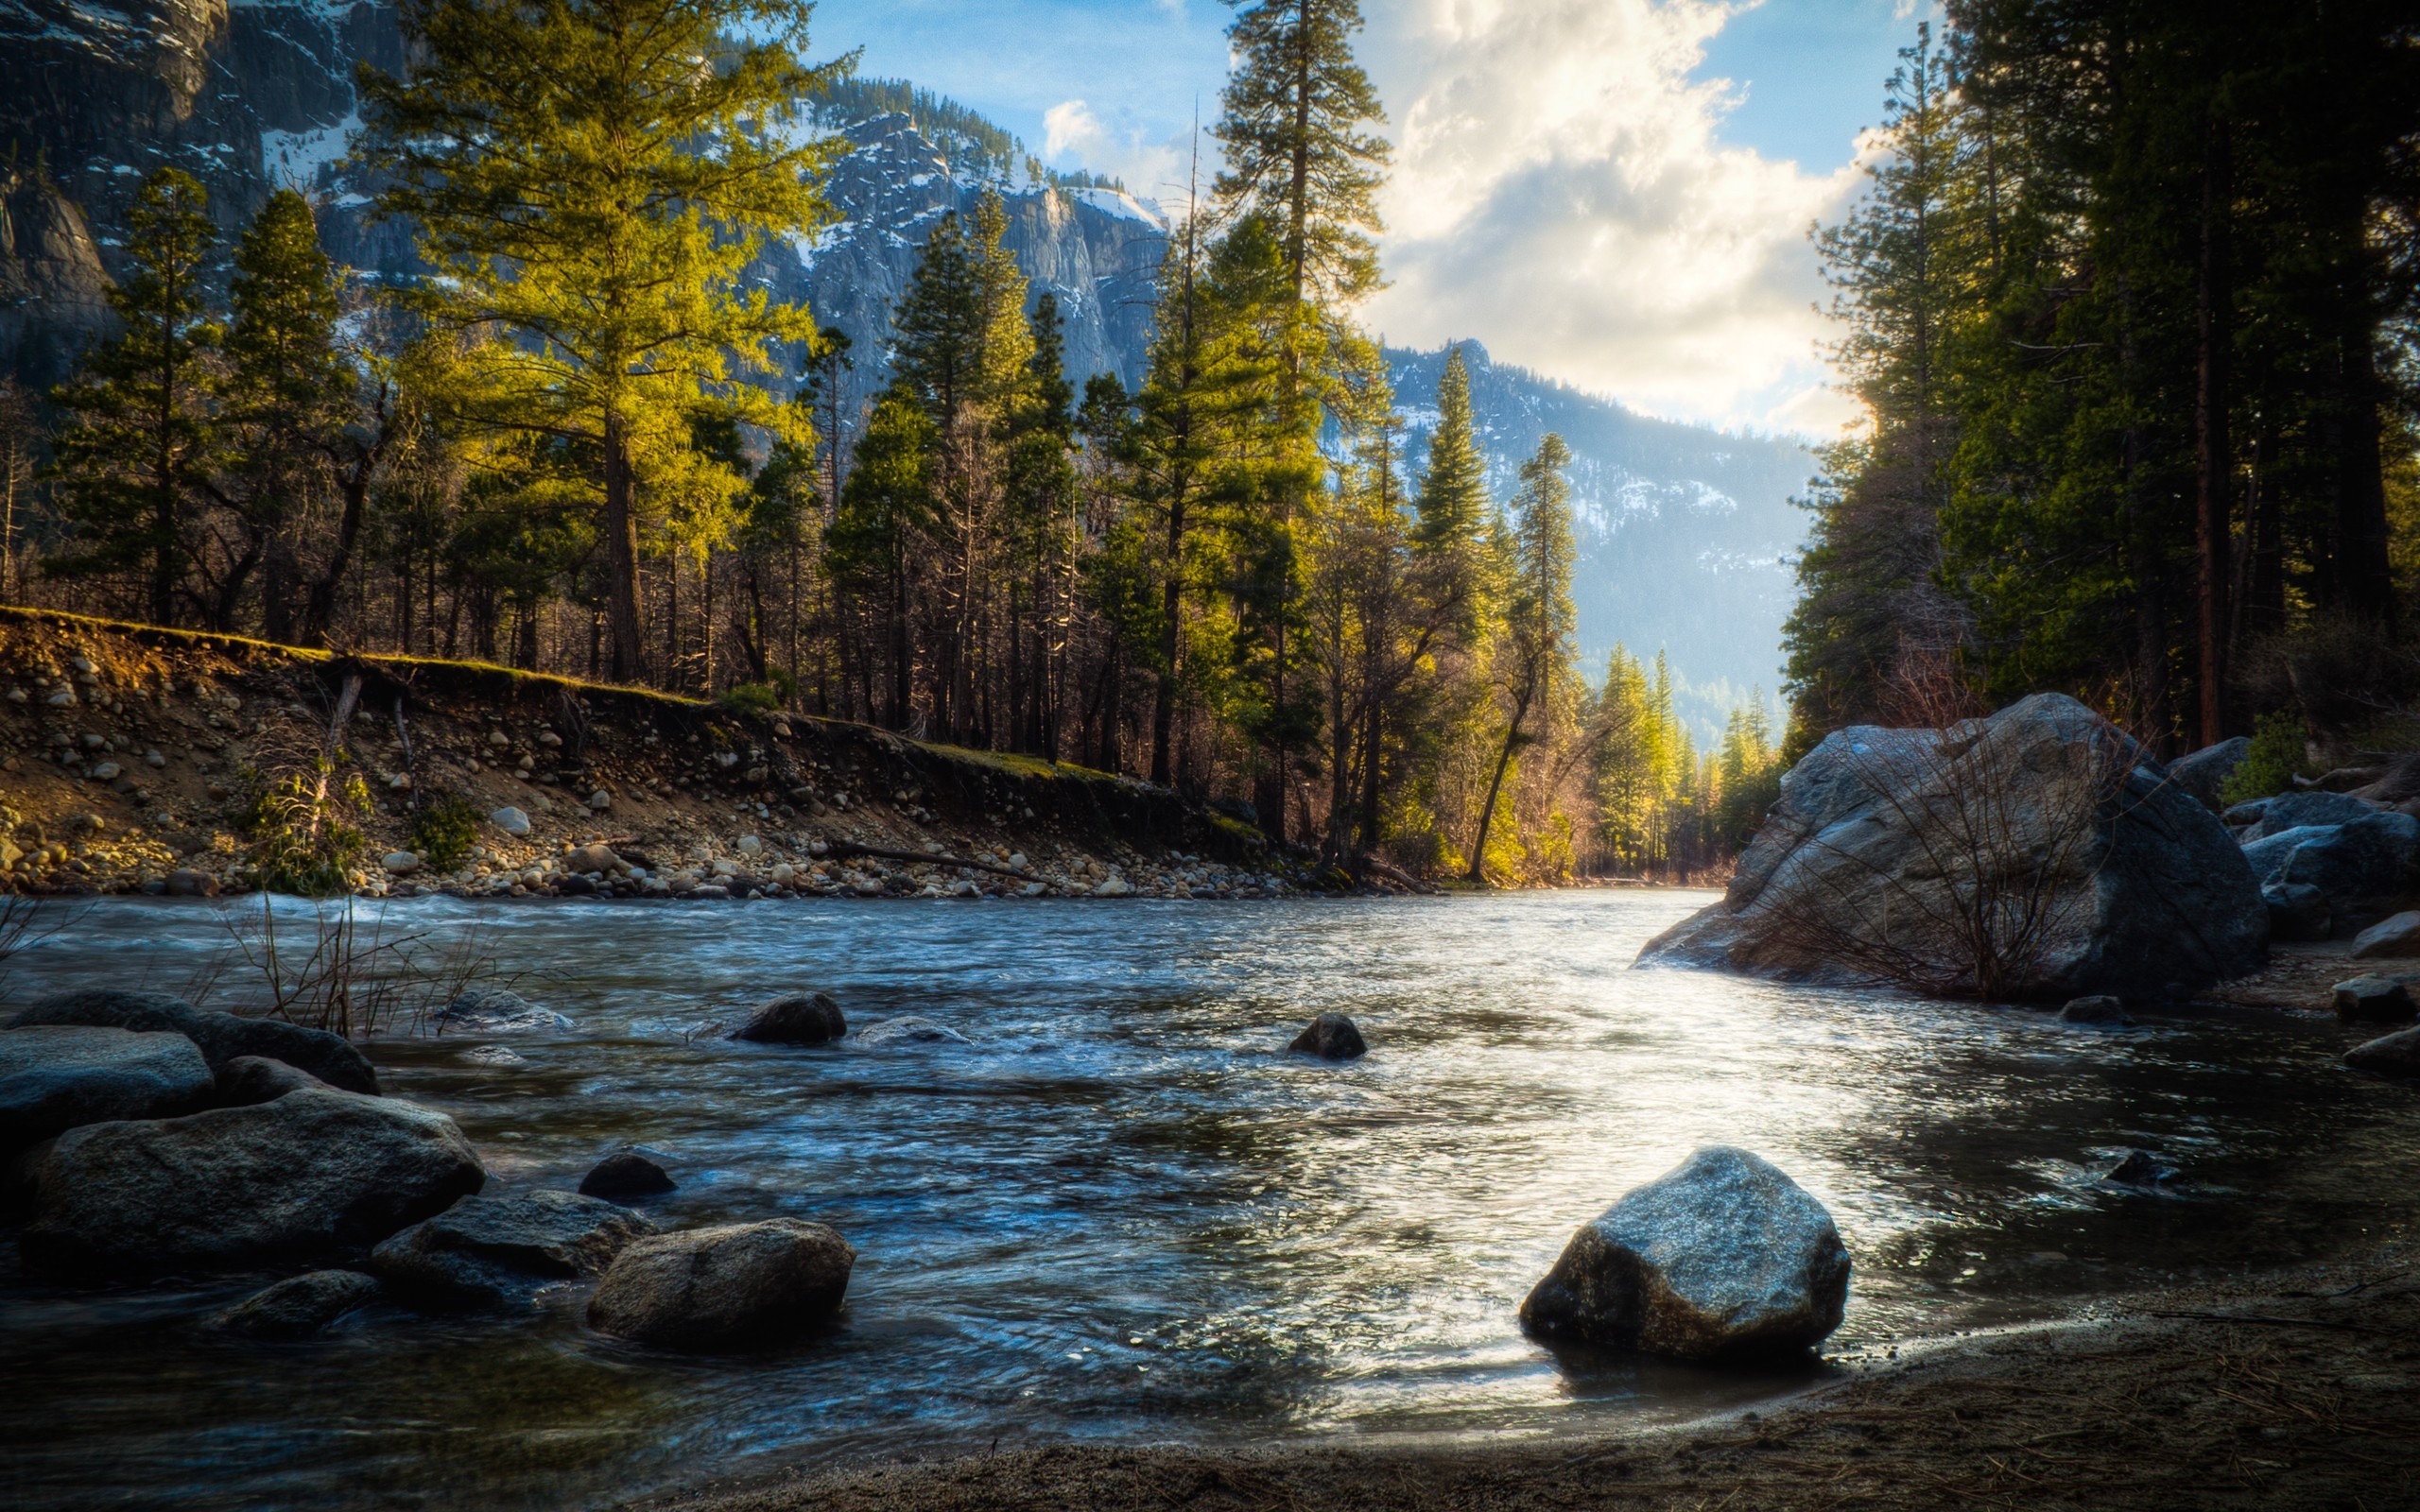 General 2560x1600 nature river mountains trees rock HDR stones outdoors